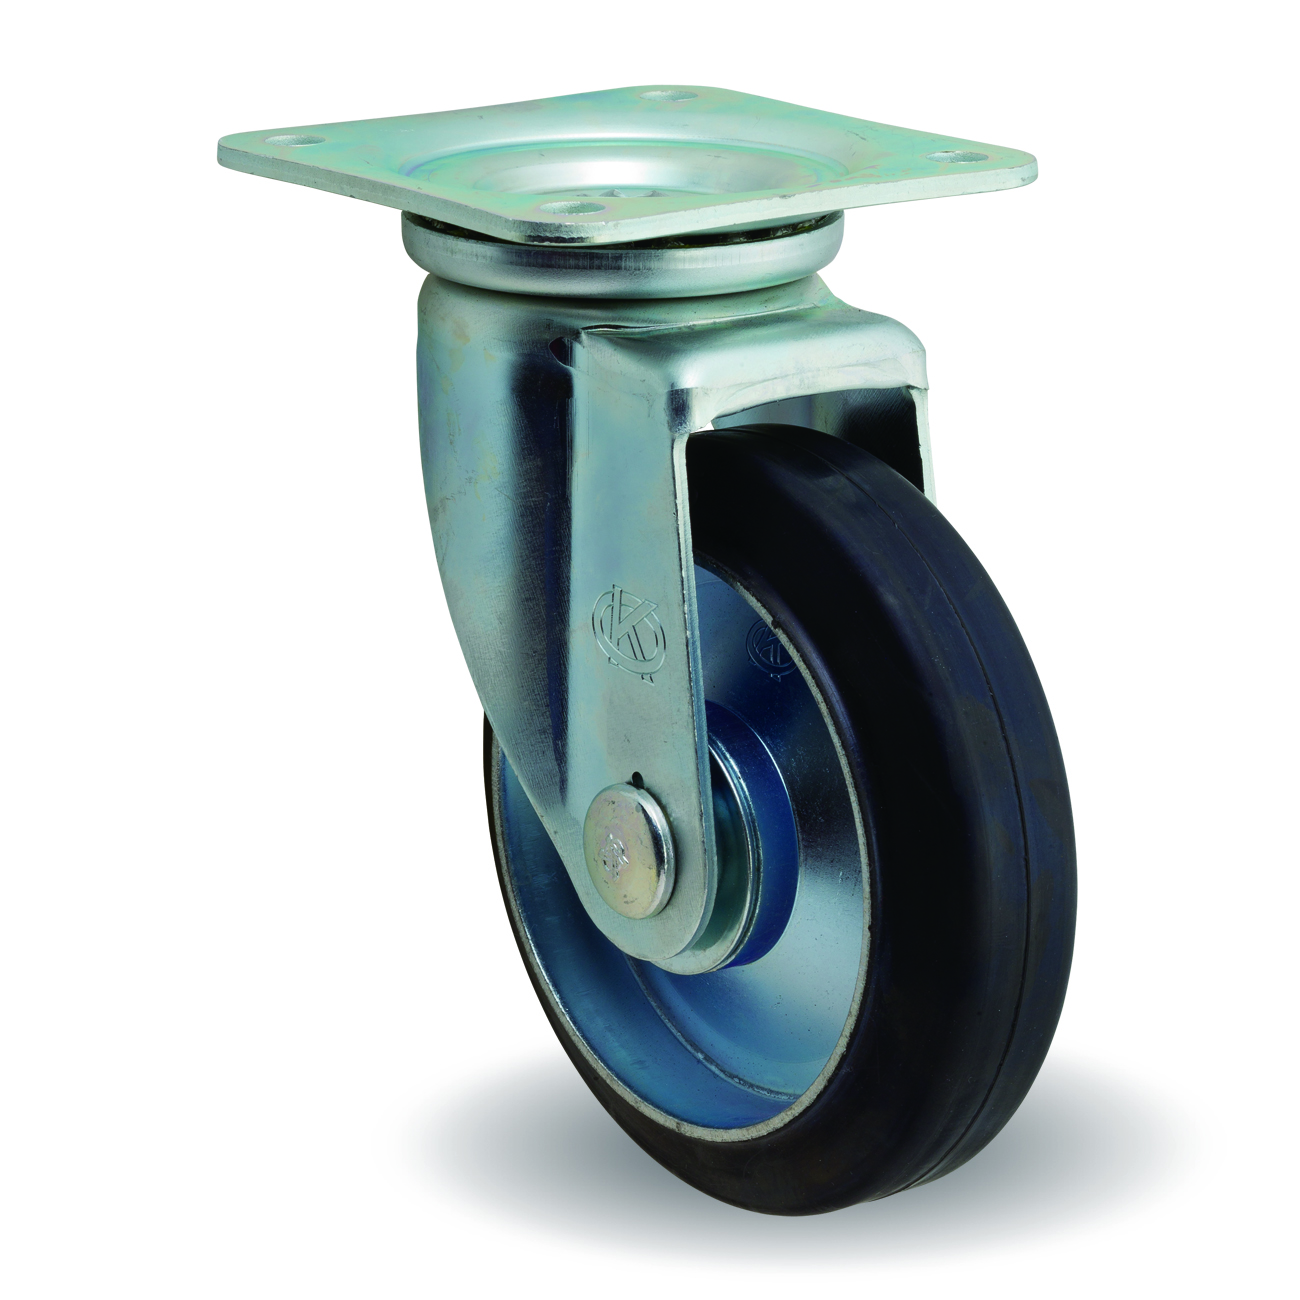 Casters - Rubber with steel swivel plate with bracket, J, F/J series.